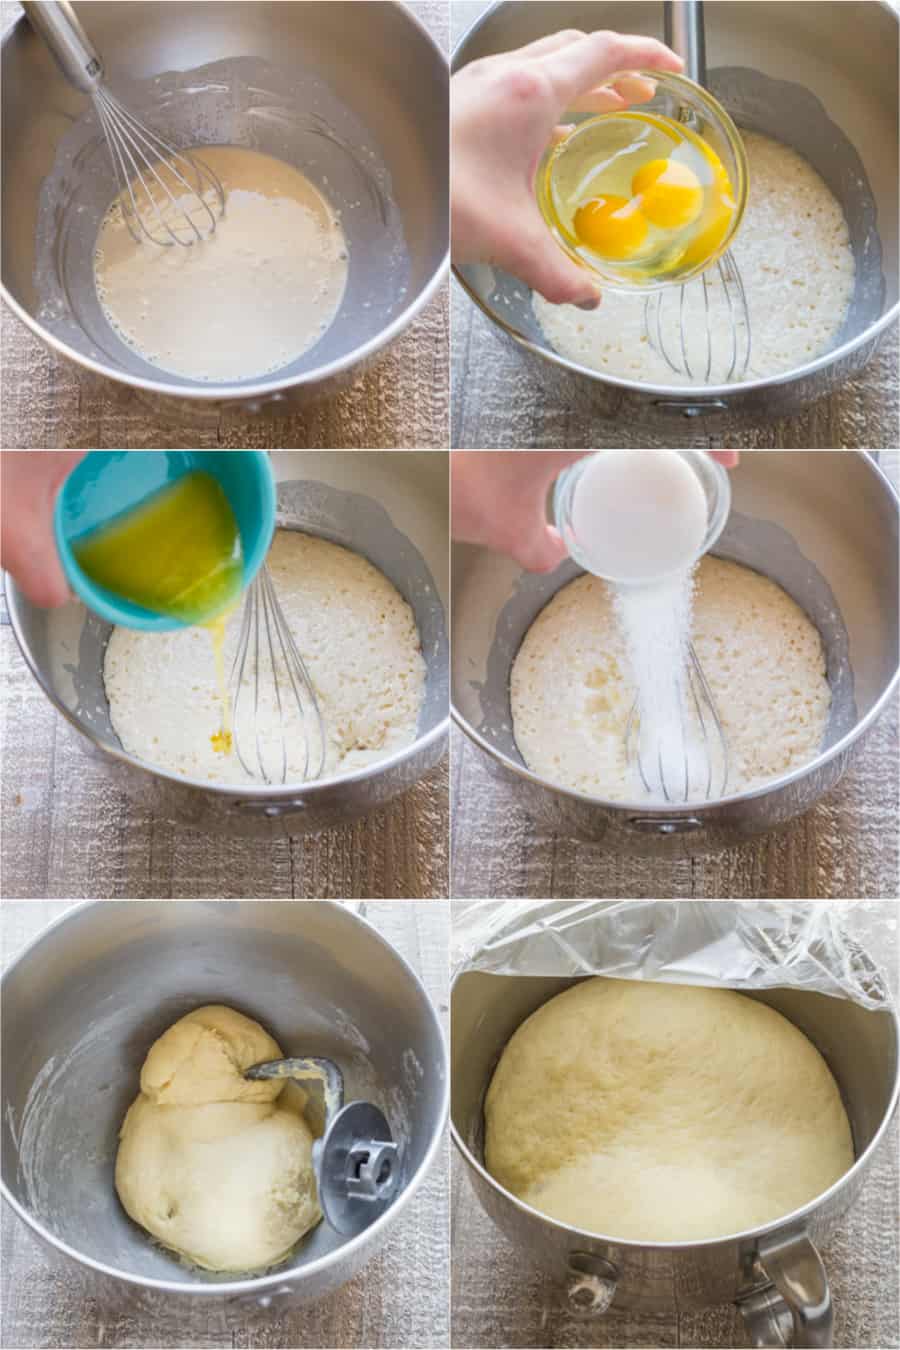 Step by step photos of the babka dough making process.